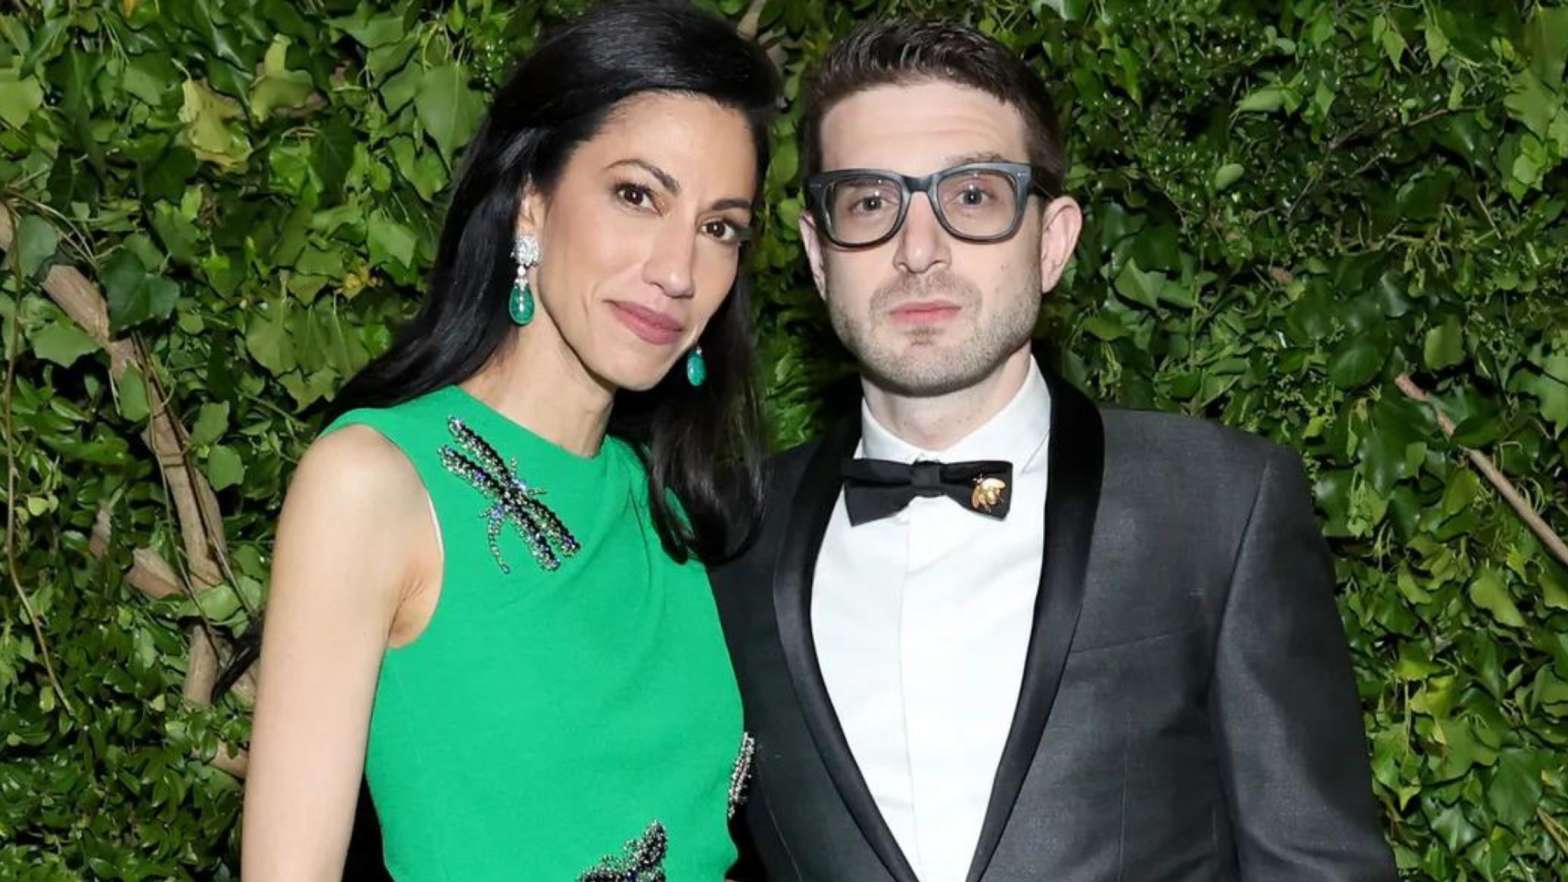 Wealthy heir Alex Soros engages with Hillary Clinton’s right-hand woman Huma Abedin